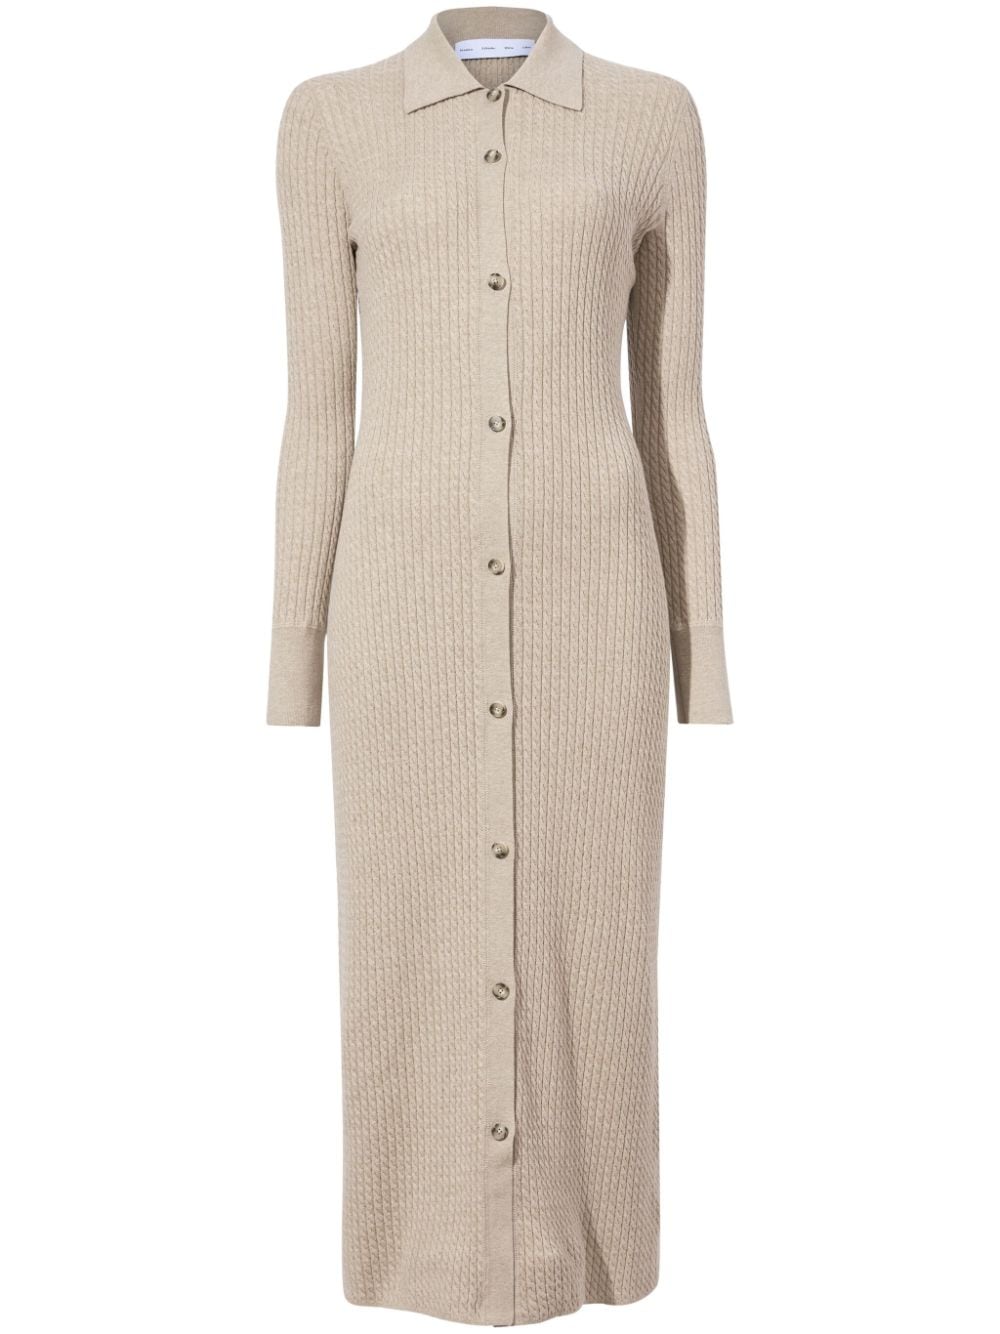 Phillips cable-knit midi dress